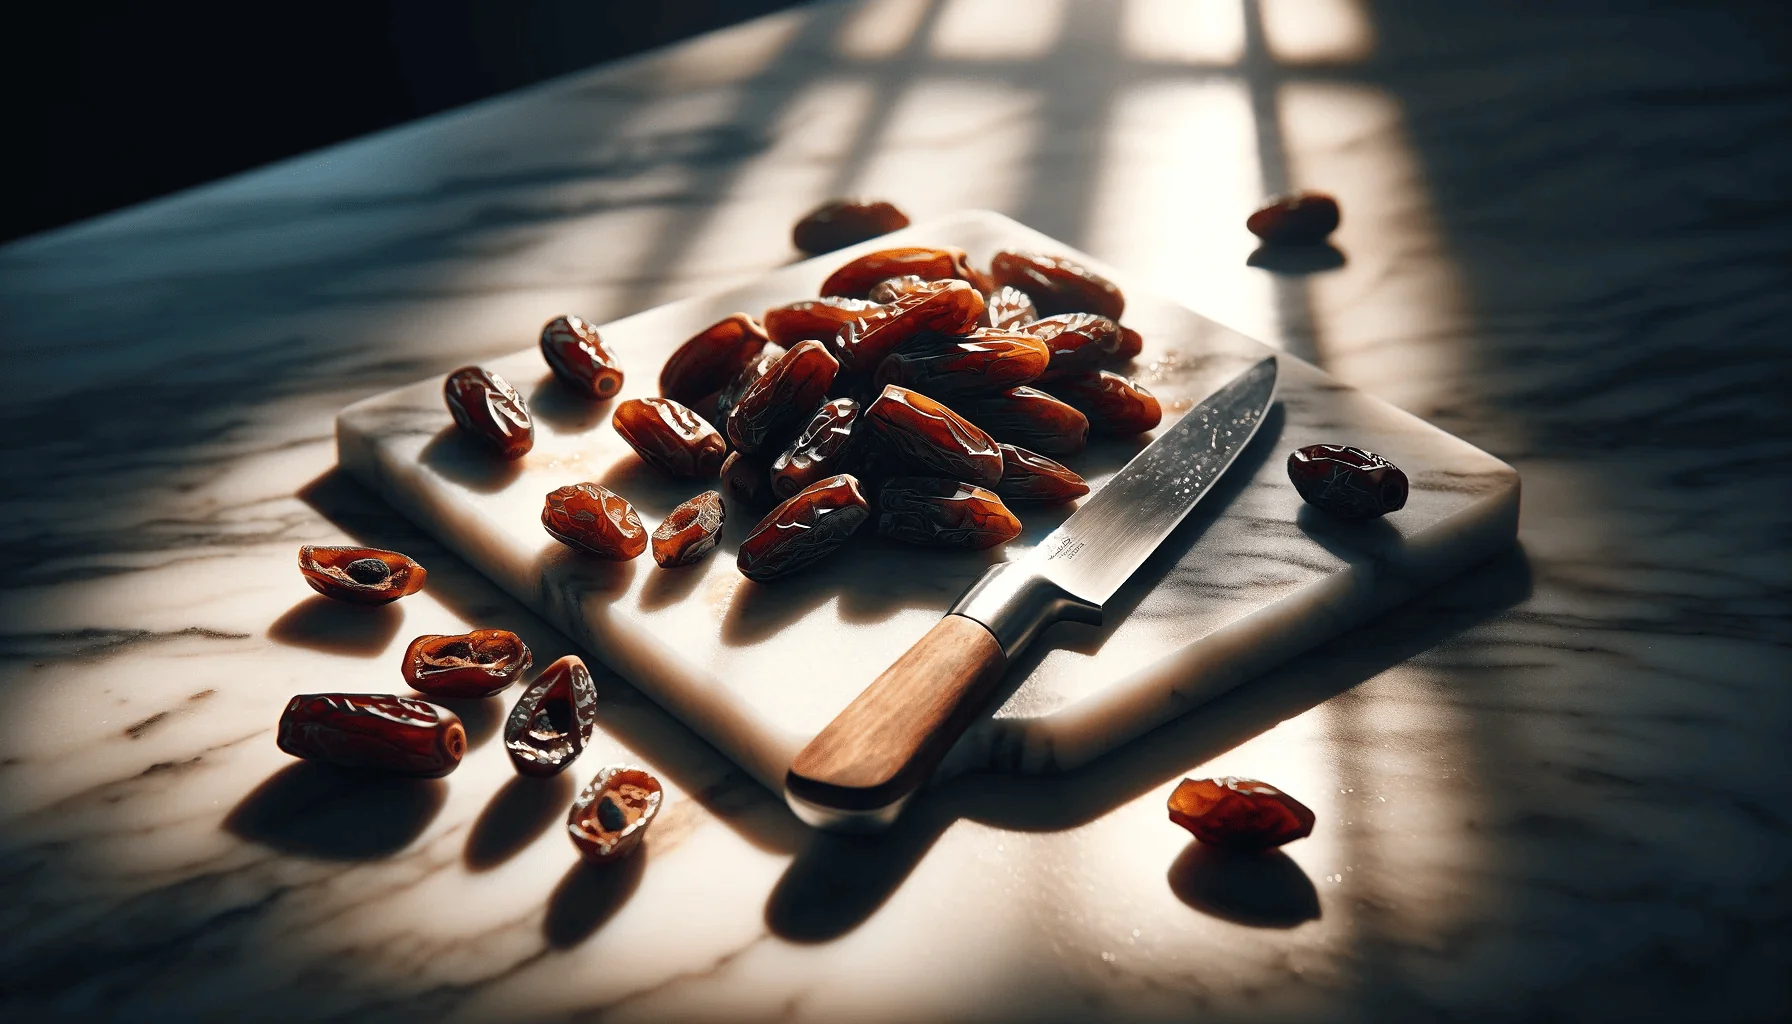 Chopped dates on a wooden cutting board with a knife